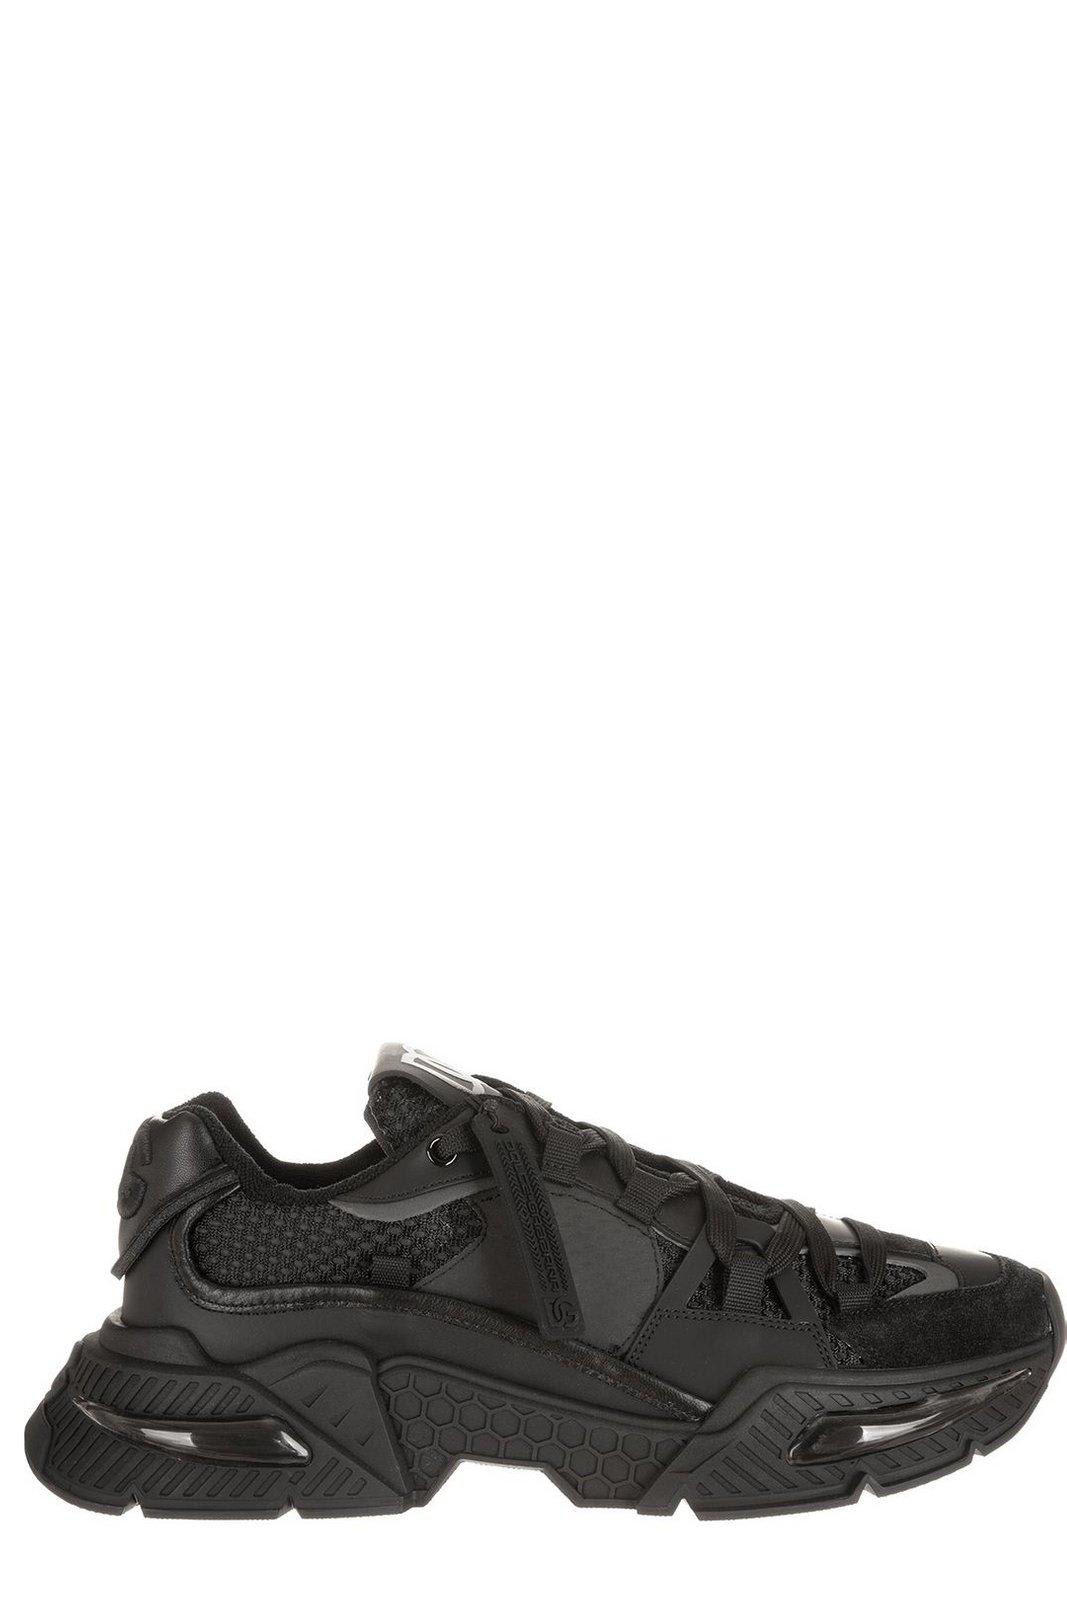 Dolce & Gabbana Airmaster Panelled Lace-up Sneakers